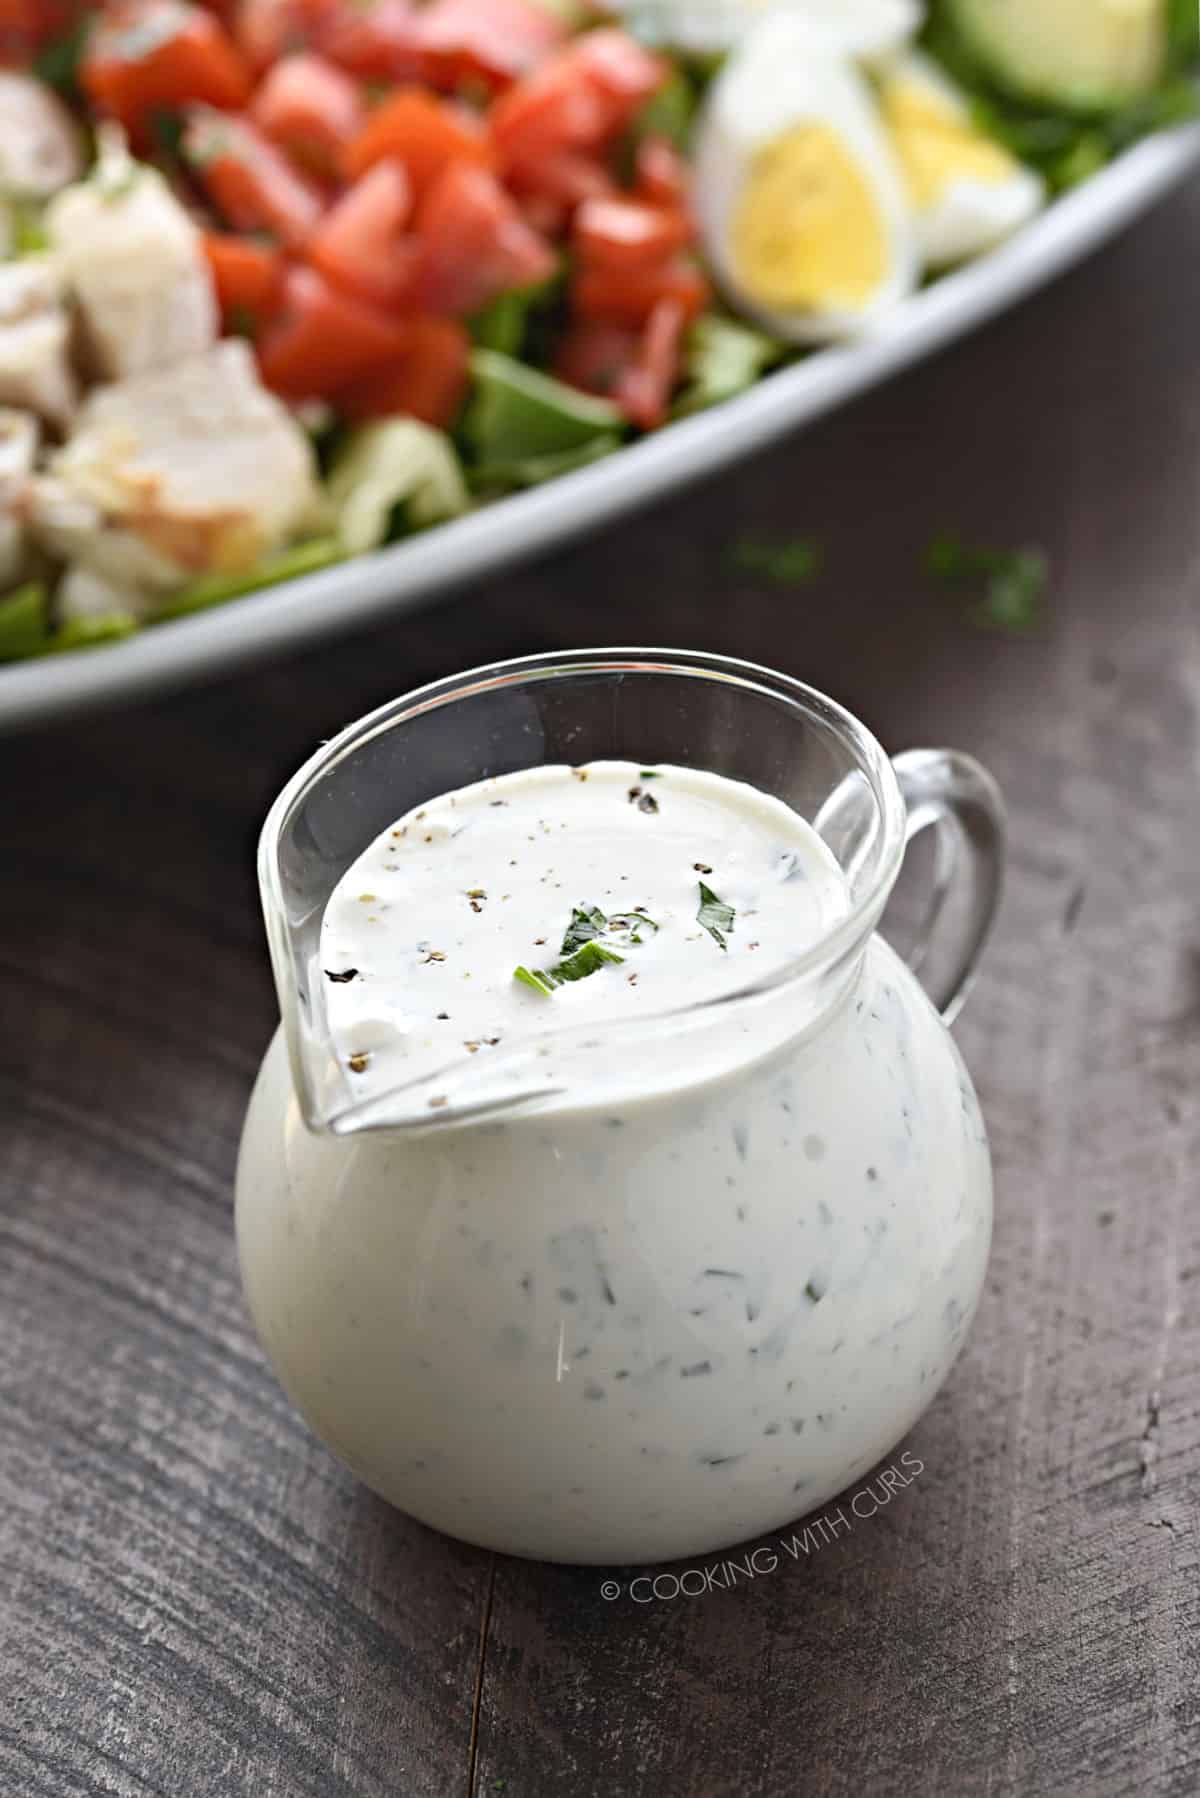 Homemade dairy free ranch dressing in a small glass pitcher sitting in front of a salad.